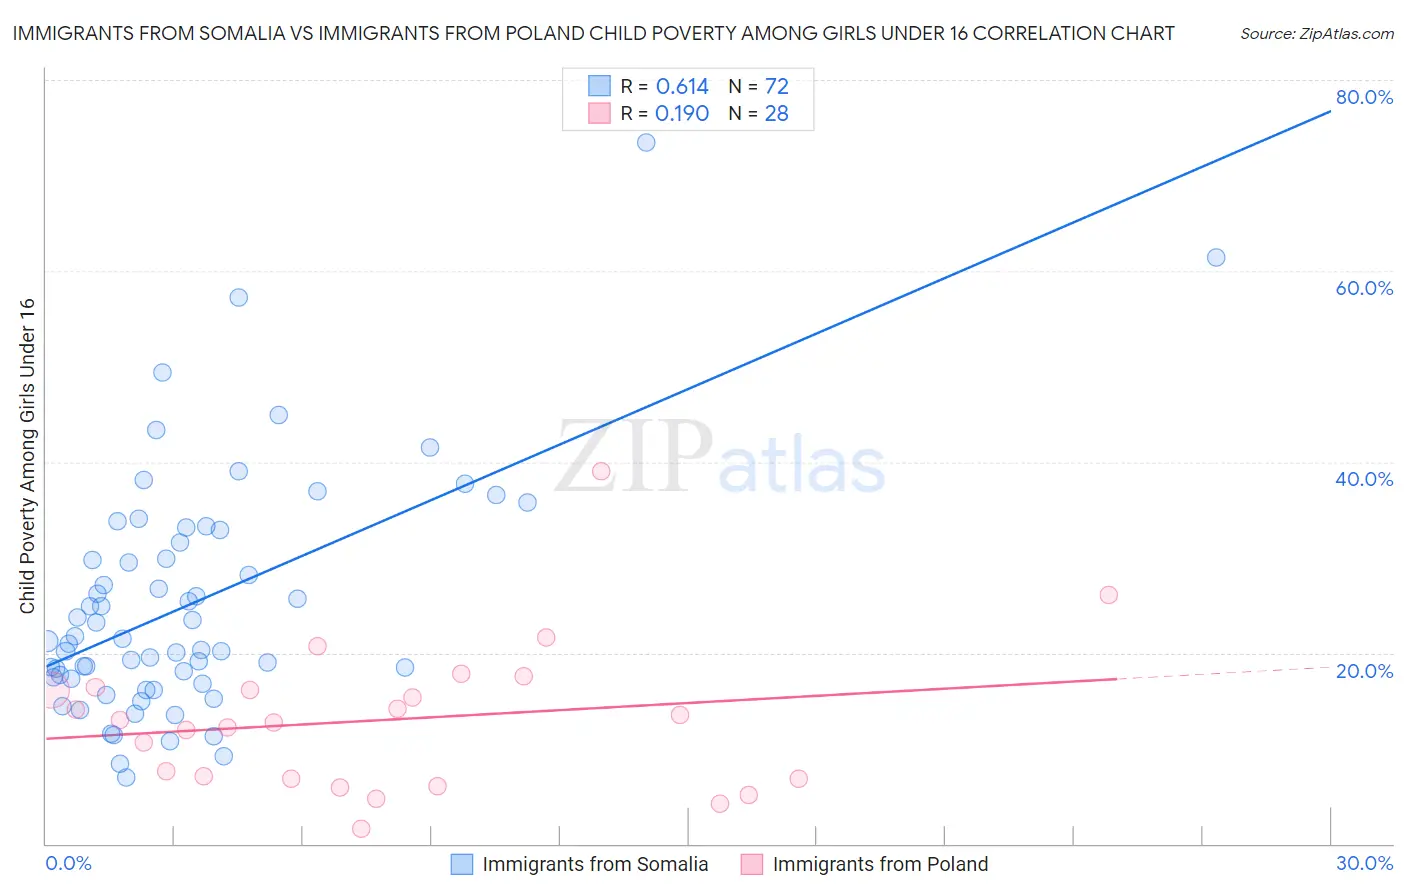 Immigrants from Somalia vs Immigrants from Poland Child Poverty Among Girls Under 16